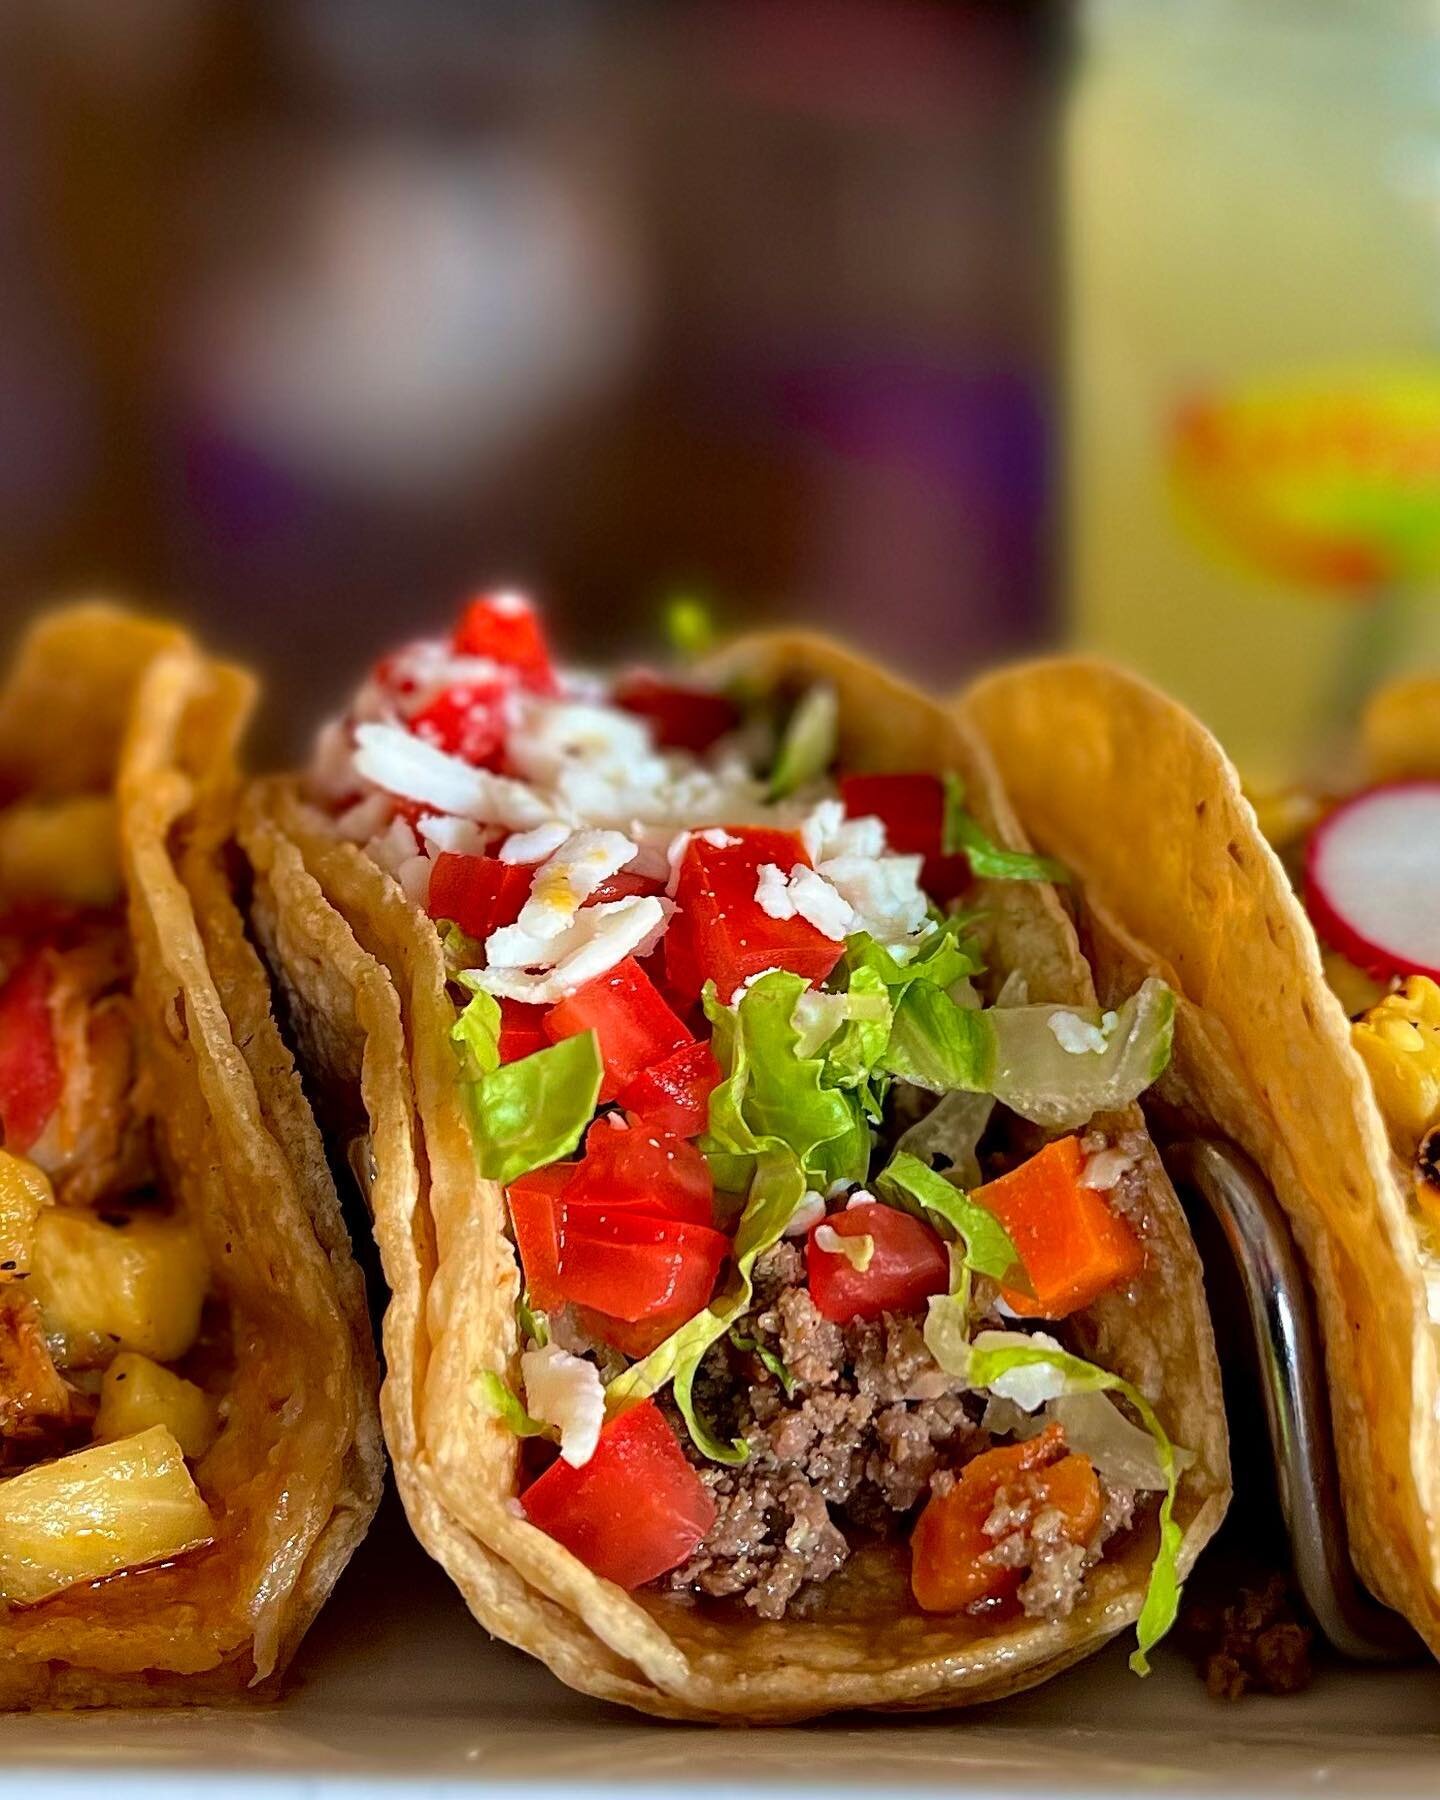 Weekends call for tacos
-
-
-
-
-
-
-
#atl #atlfood #atlfoodie #atlfoodies #atleats #atlantaeats #atlantaeatstv #atlantafood #atlantafoodies #atlantafoodie #brunch #atlbrunch #brunchatlanta #brunchatl #atlweekend